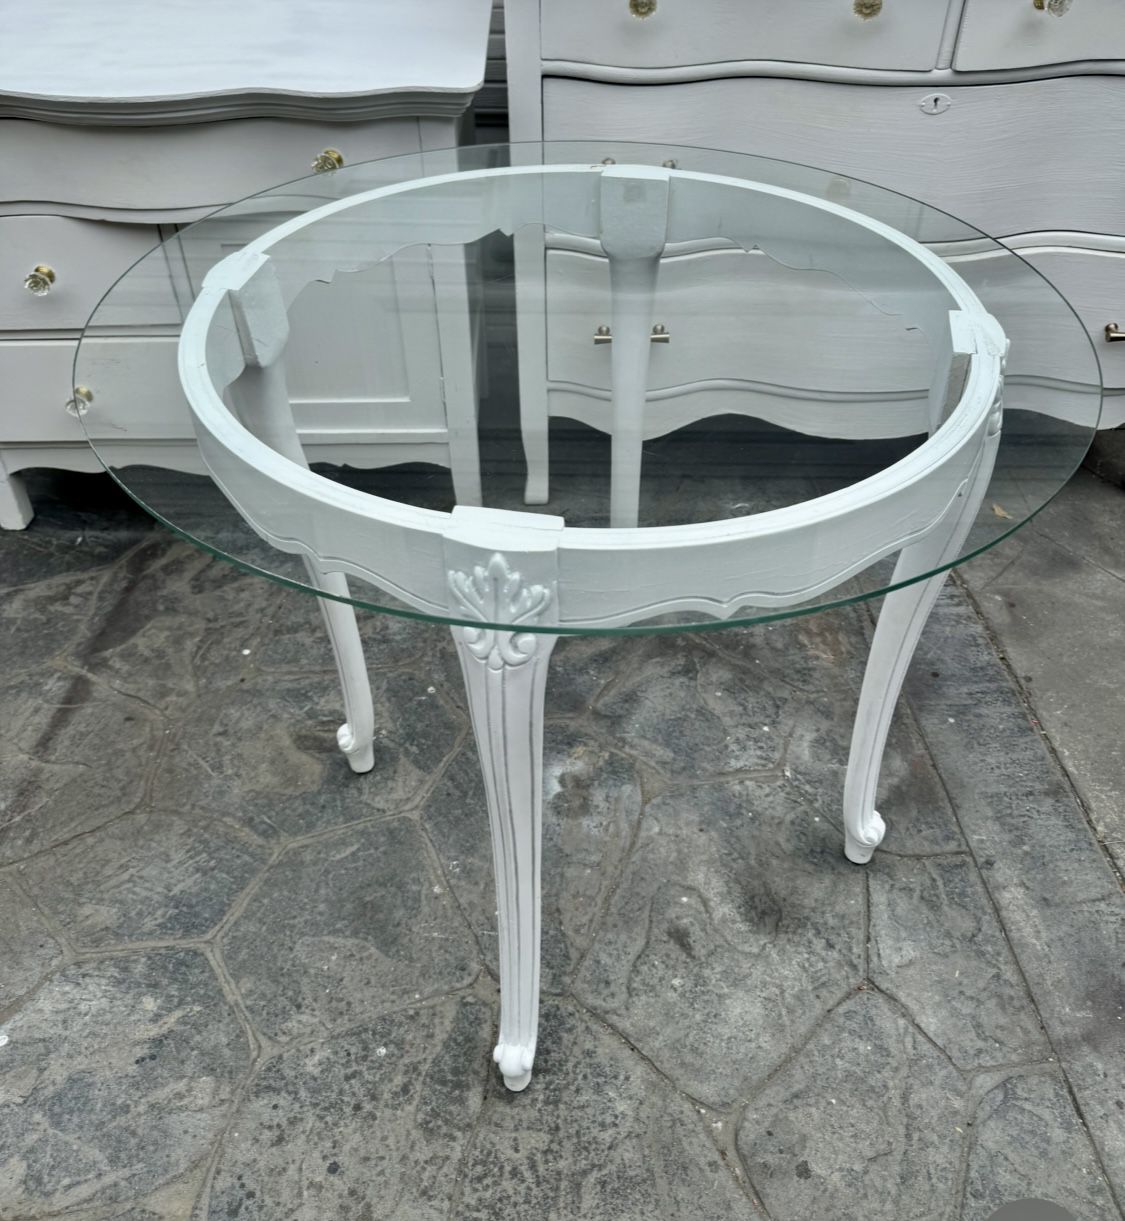 3 PATRA all steel Plastic guest chair w/chrome base $20 ea, round cafe / dinette table $20 